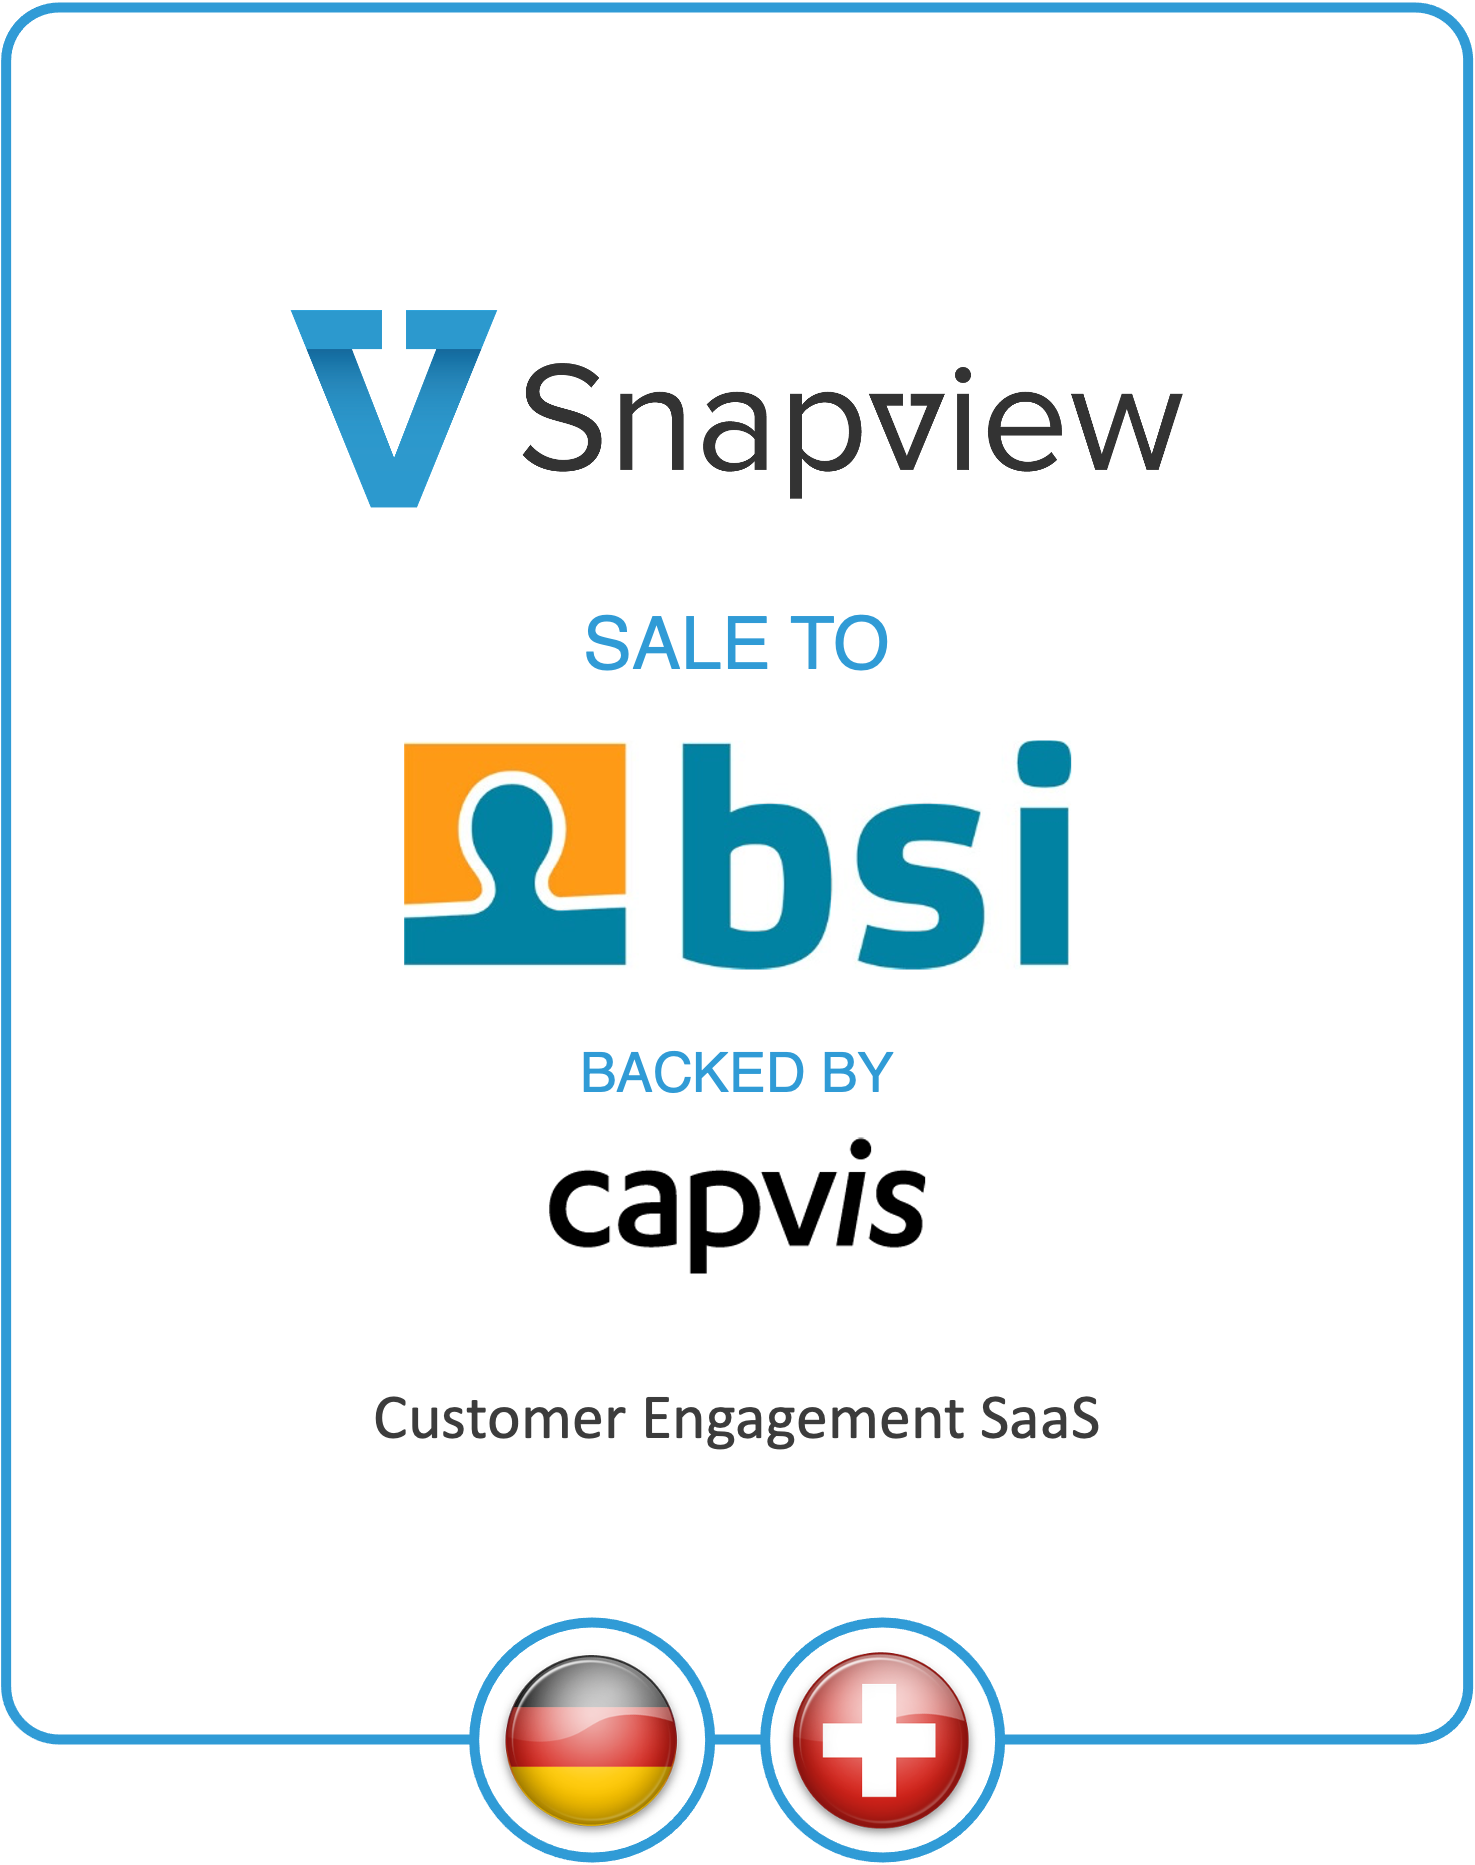 Drake Star Advises Snapview on its Sale to BSI AG